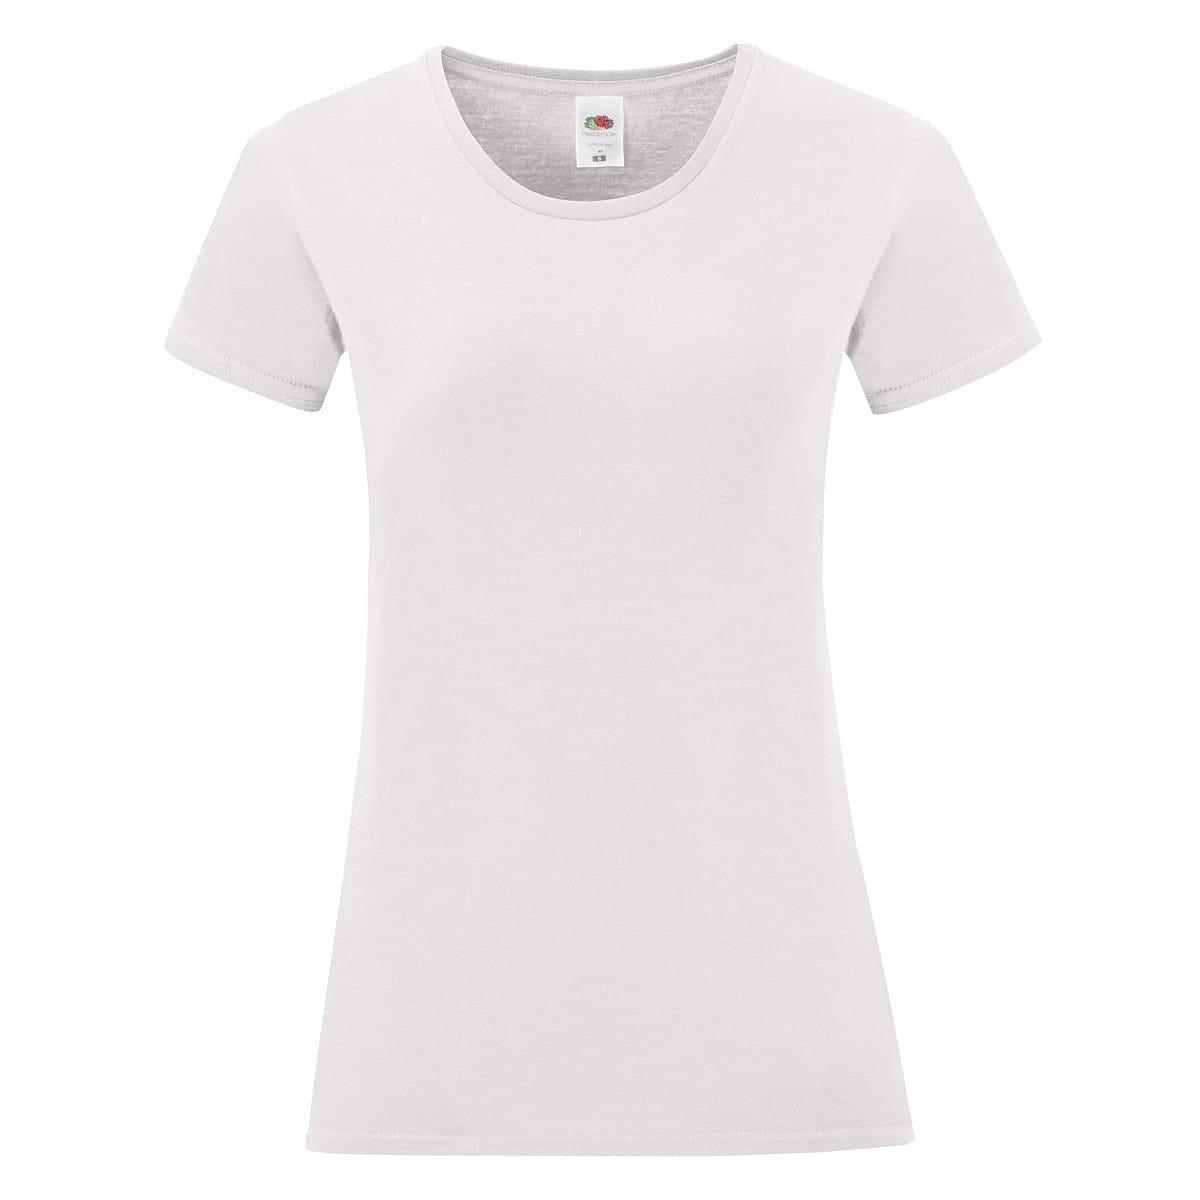 Fruit Of The Loom Womens Iconic T-Shirt in White (Product Code: 61432)